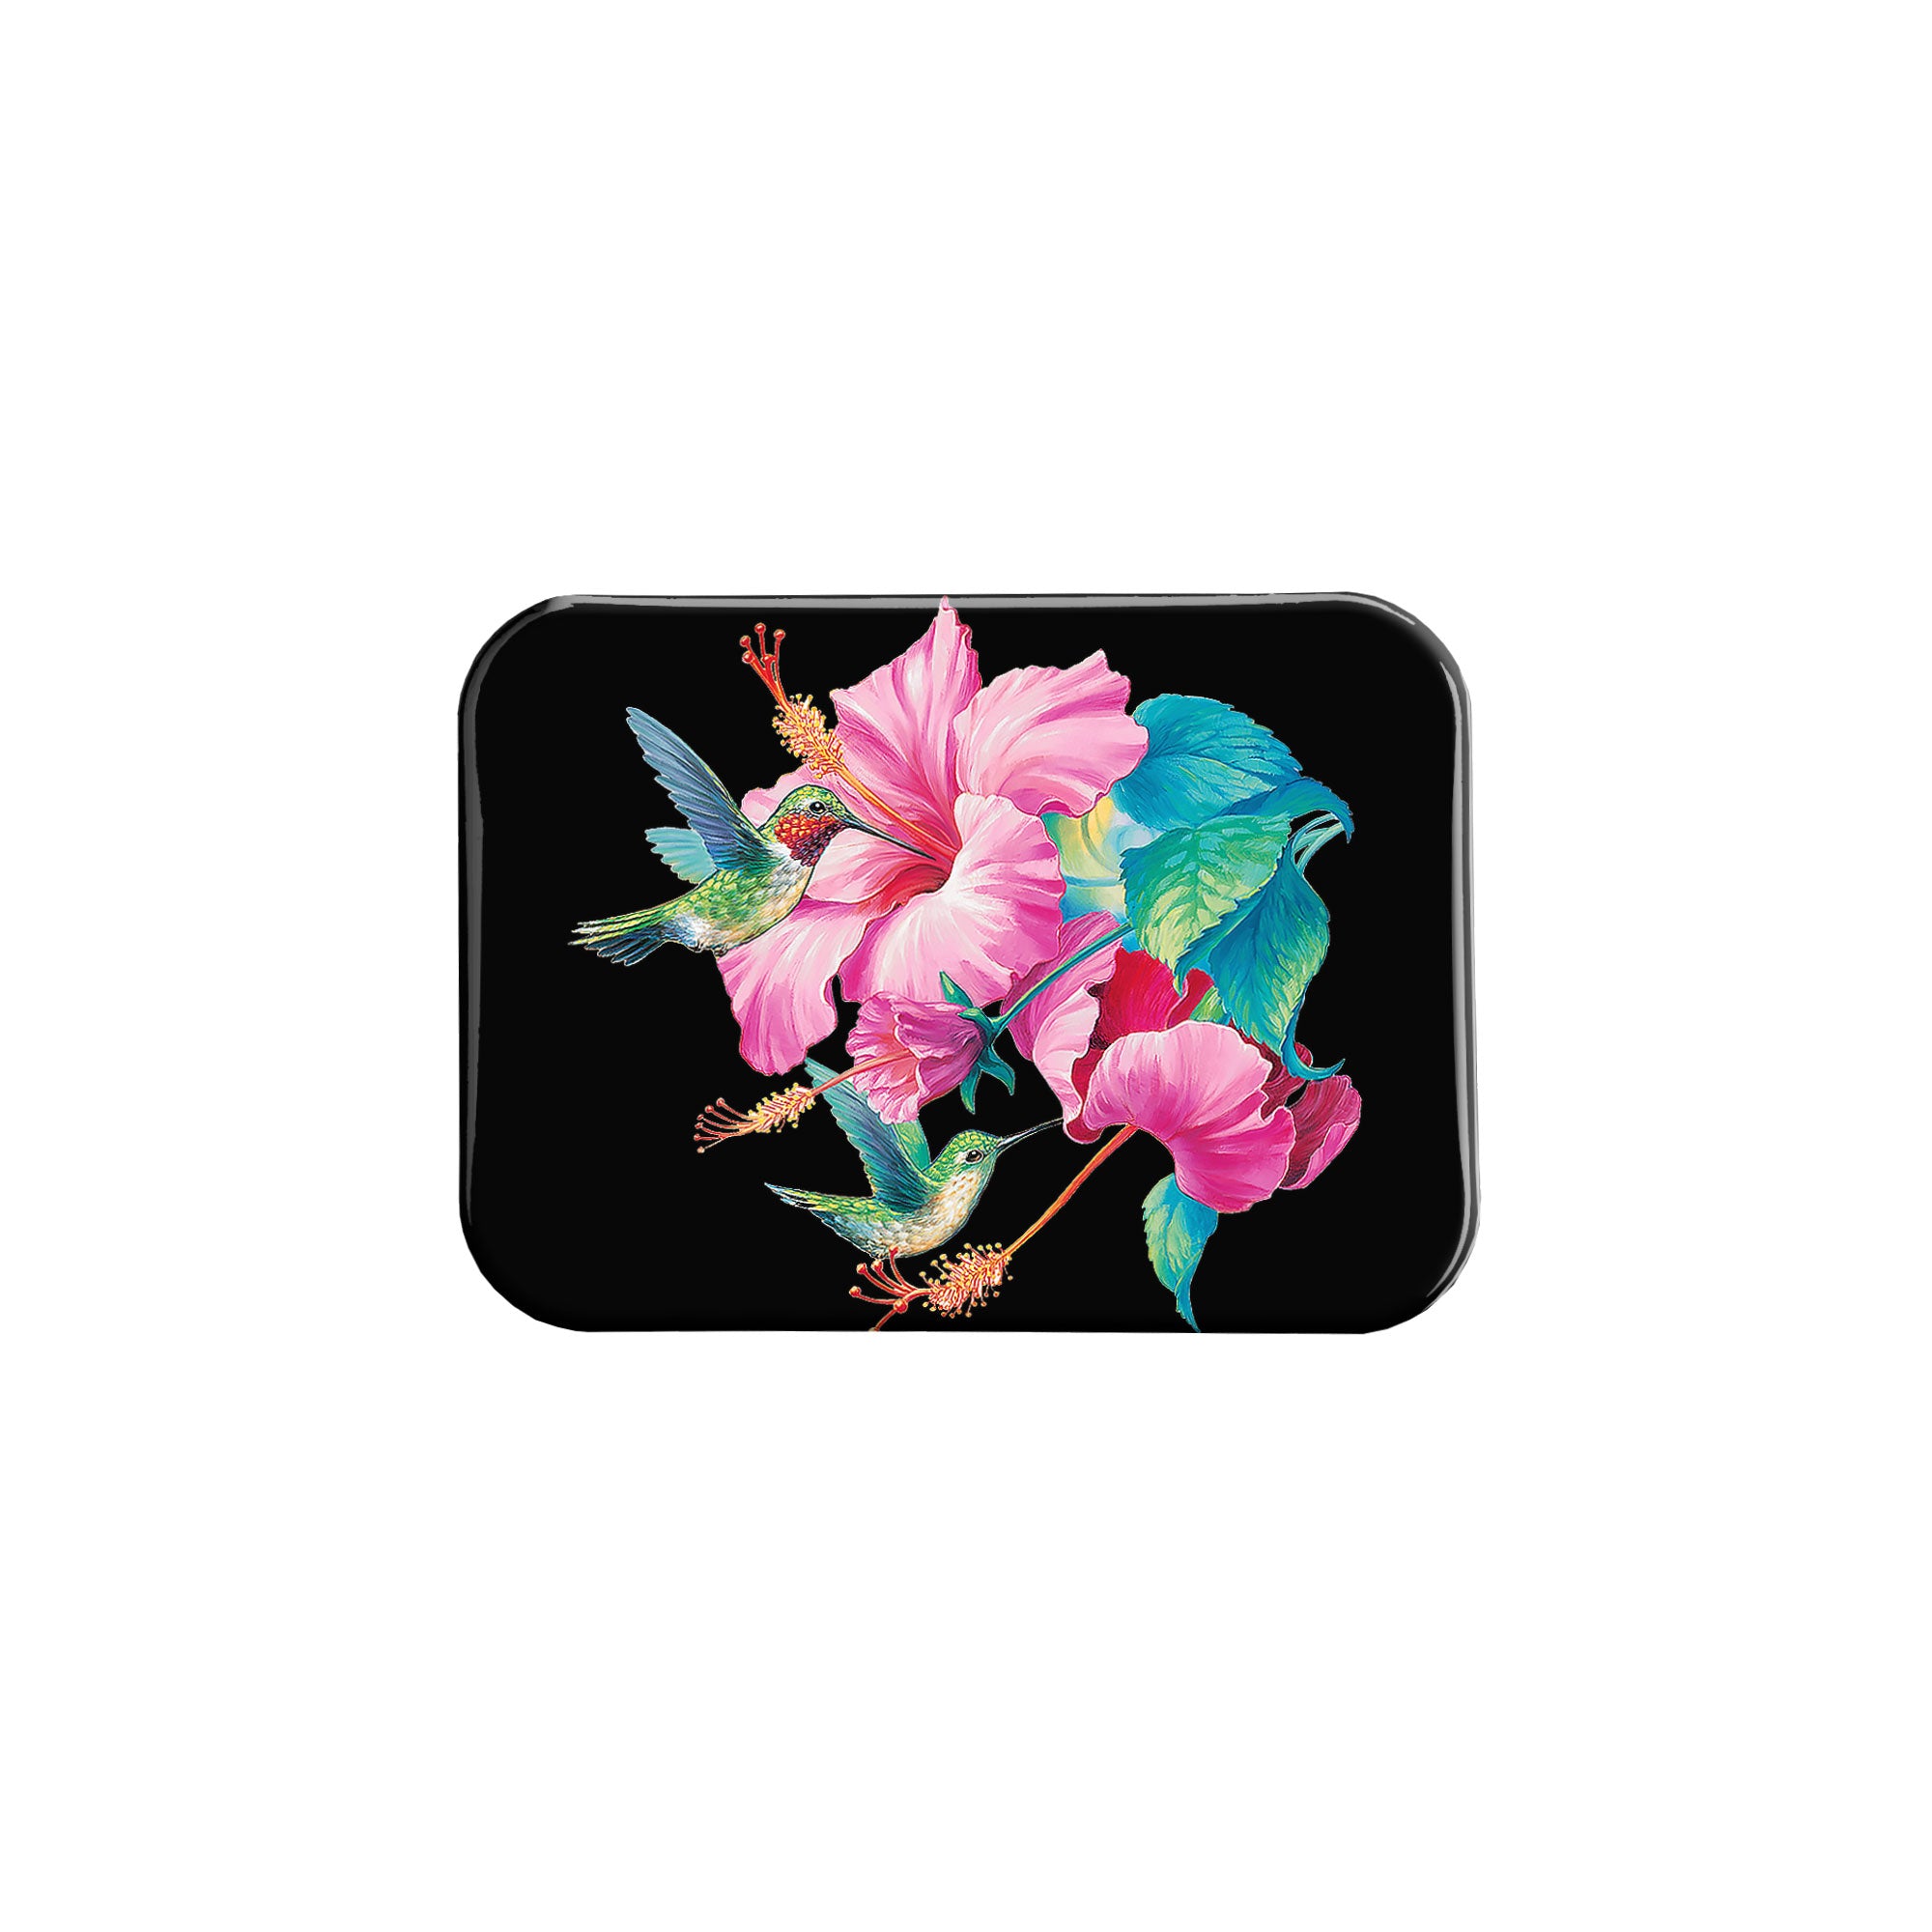 "Rubythroats And Hibiscus" - 2.5" X 3.5" Rectangle Fridge Magnets